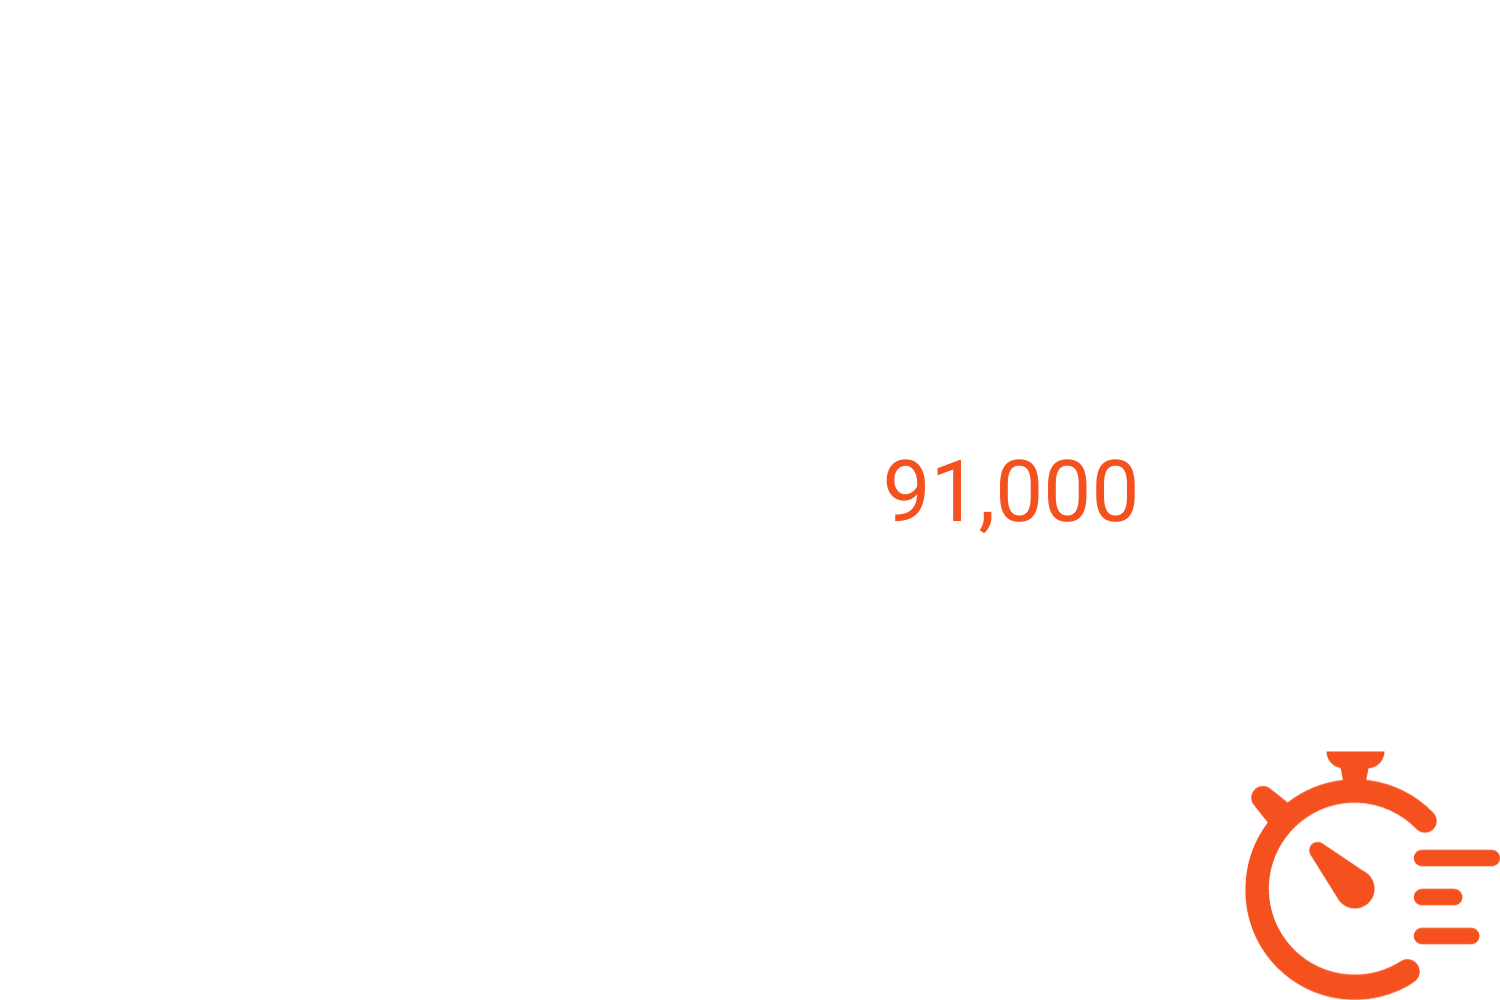 Quick assign on Activity views is the most popular feature in Allocate Activity Manager. This has been used 91,000 times in 2023! Saving users valuable time when making changes to their activities.